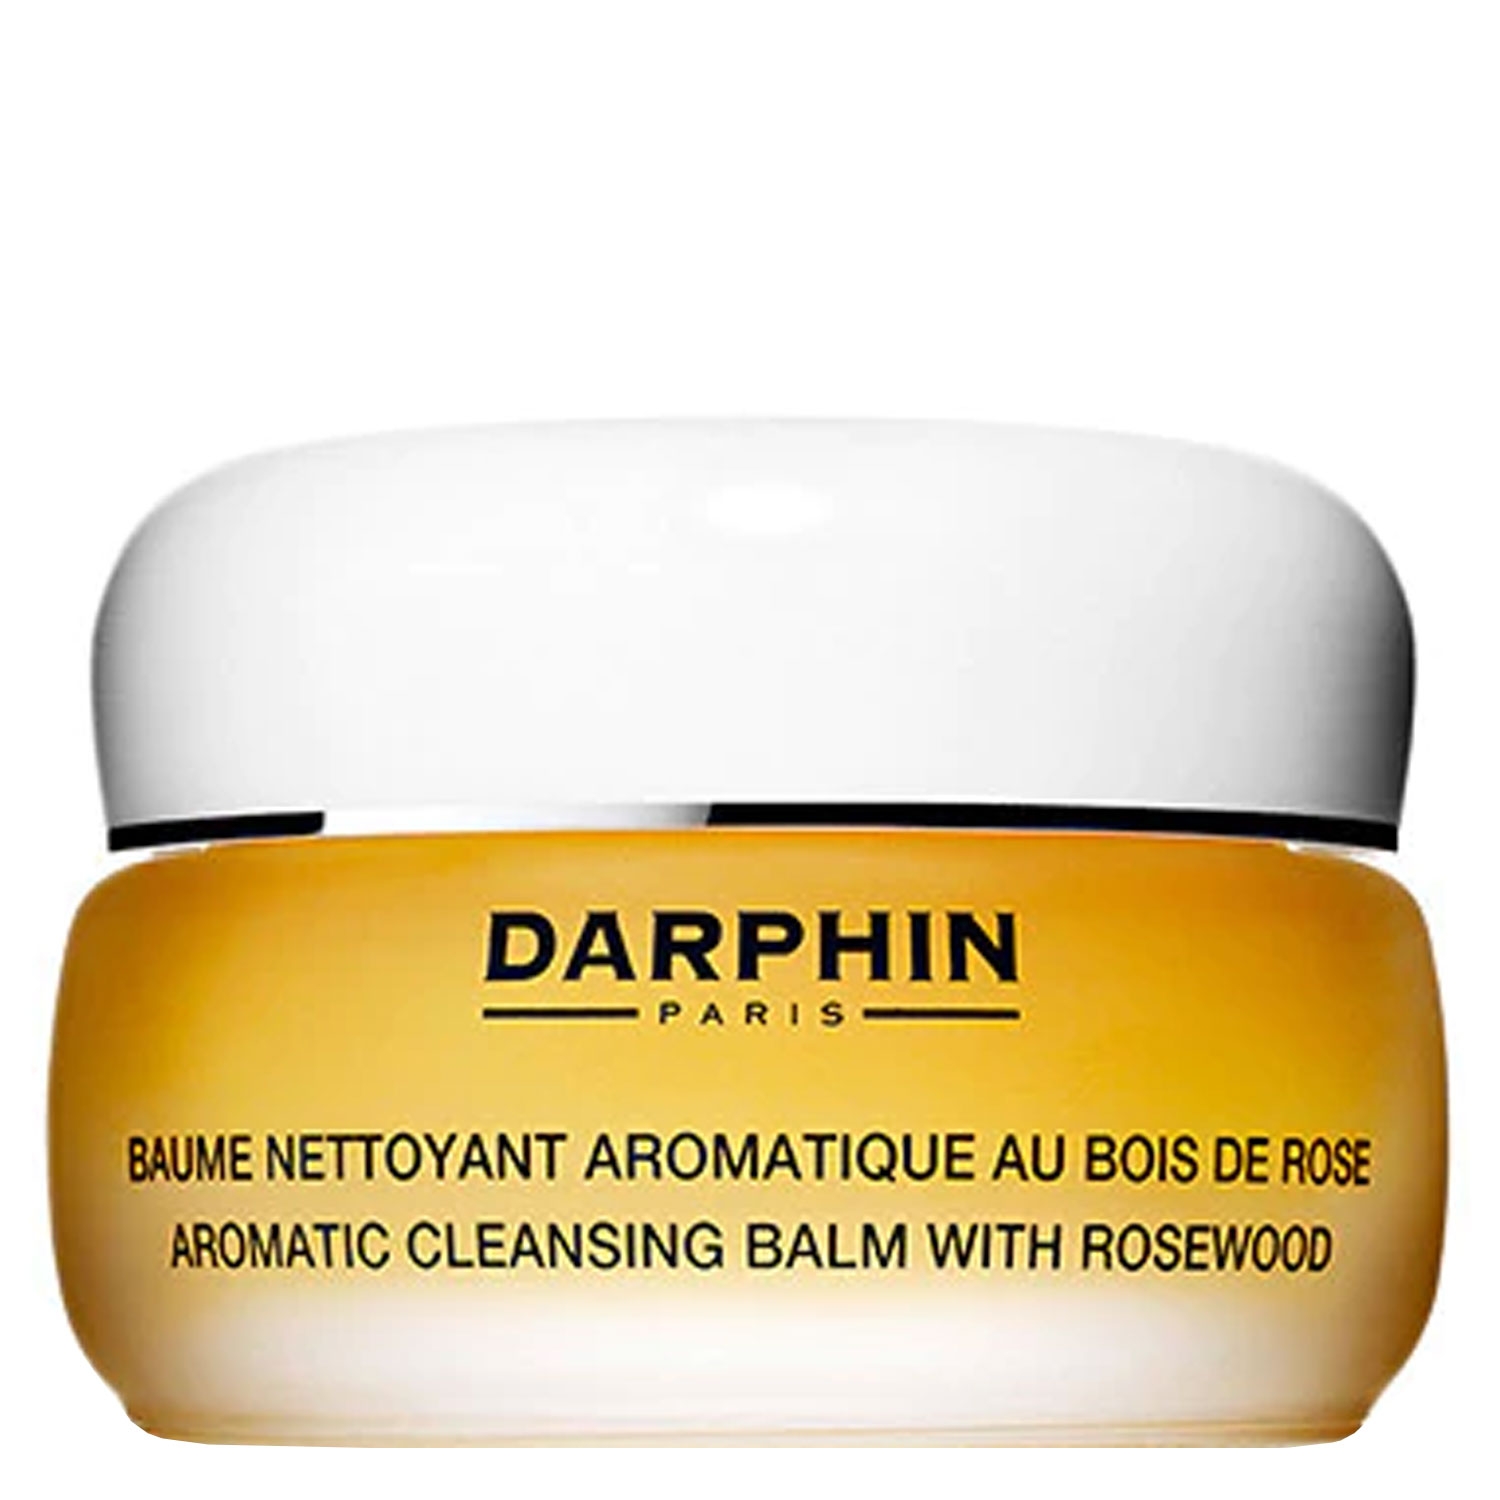 Image du produit de DARPHIN CARE - Aromatic Cleansing Balm with Rosewood